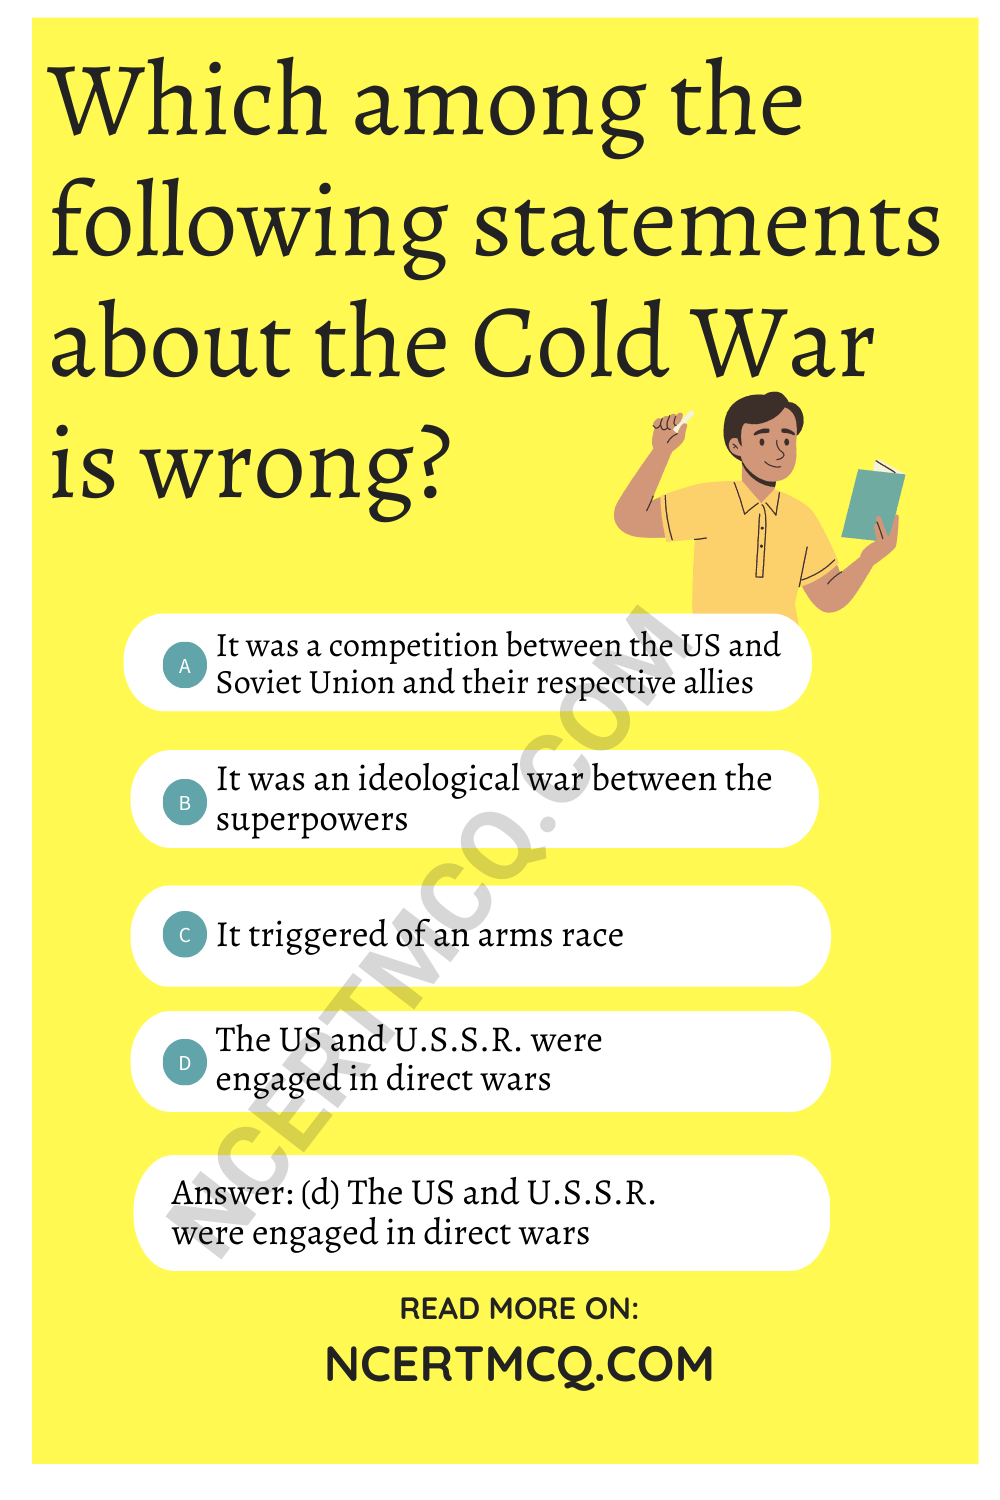 Which among the following statements about the Cold War is wrong?